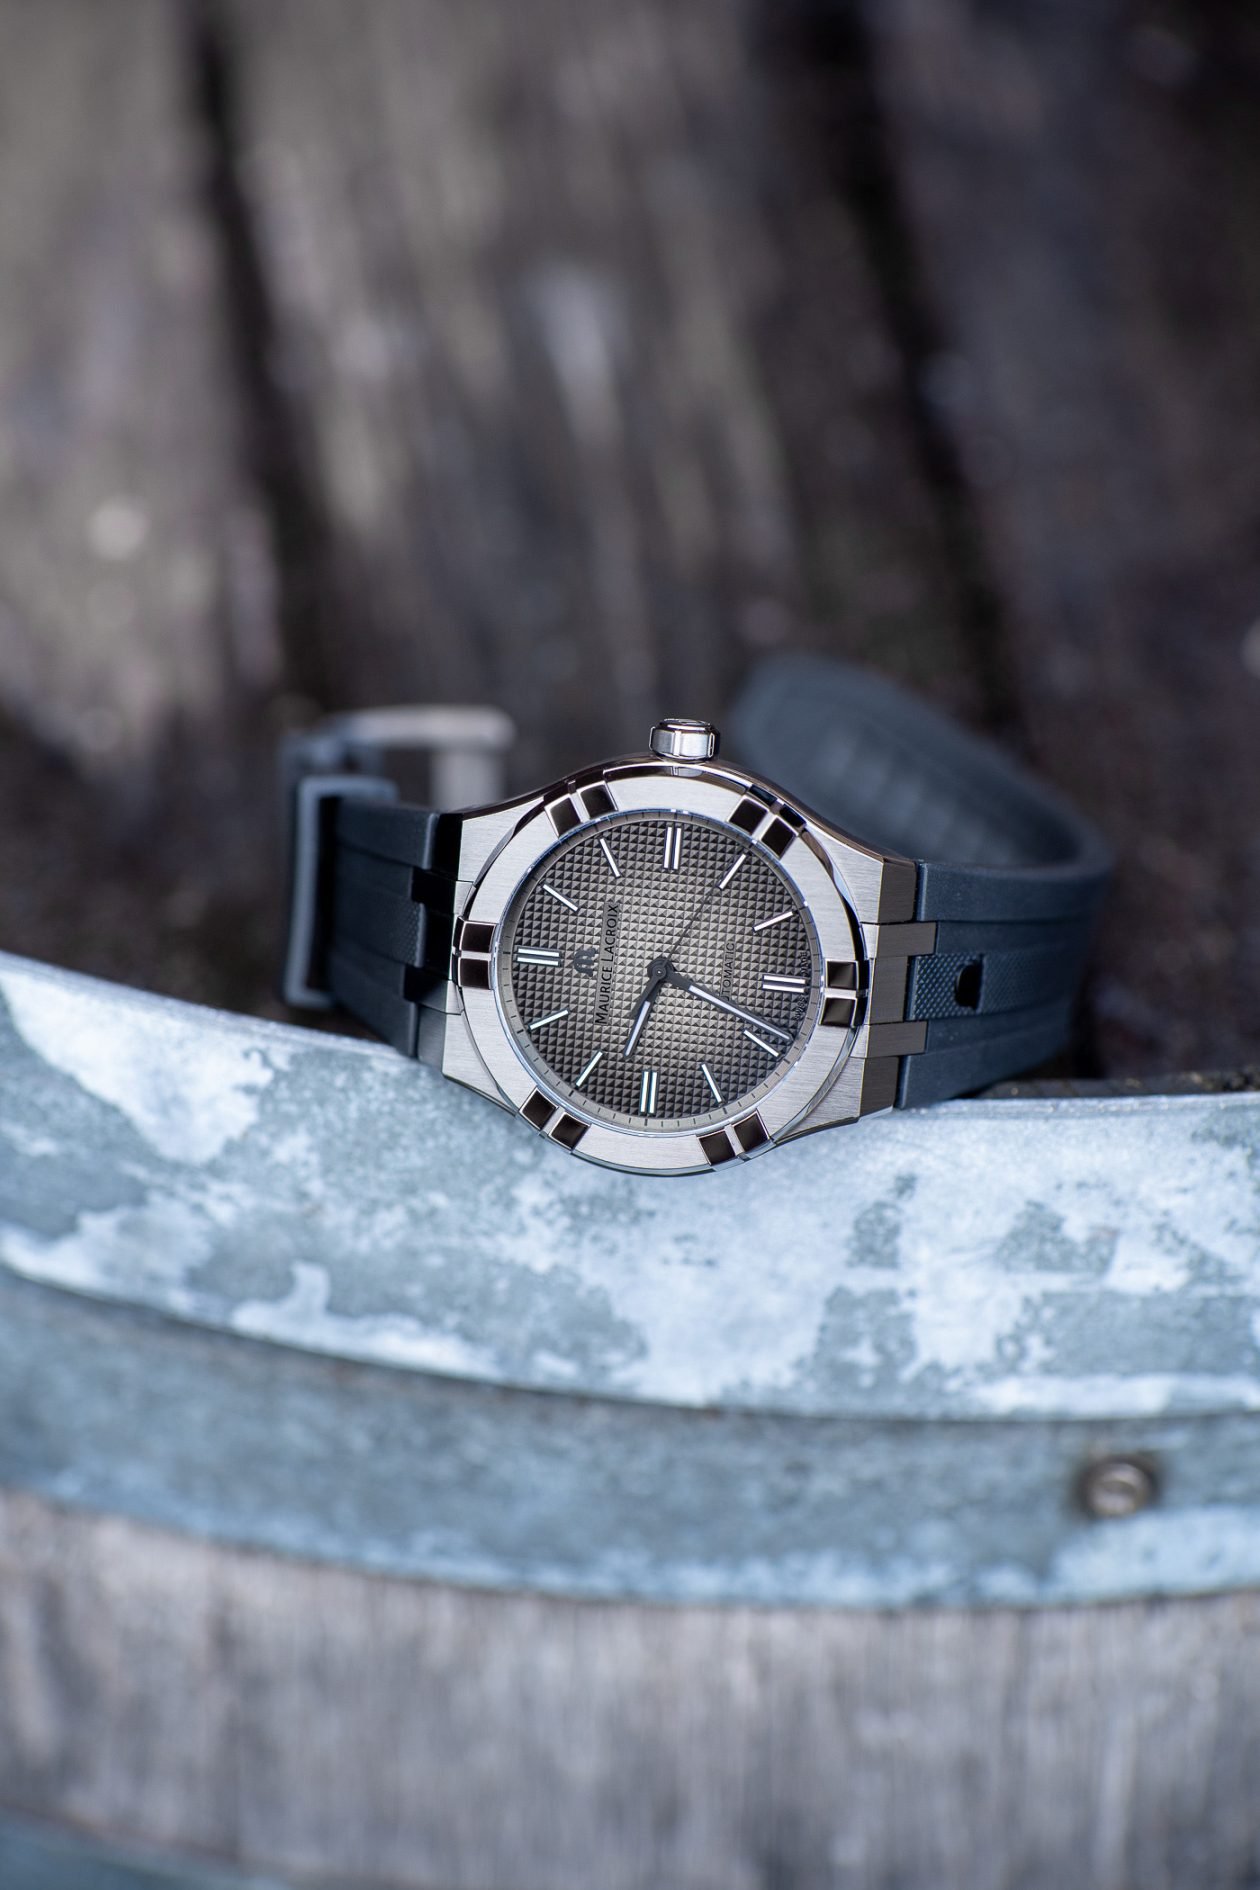 Maurice Lacroix Aikon Gunmetal PVD Limited Edition